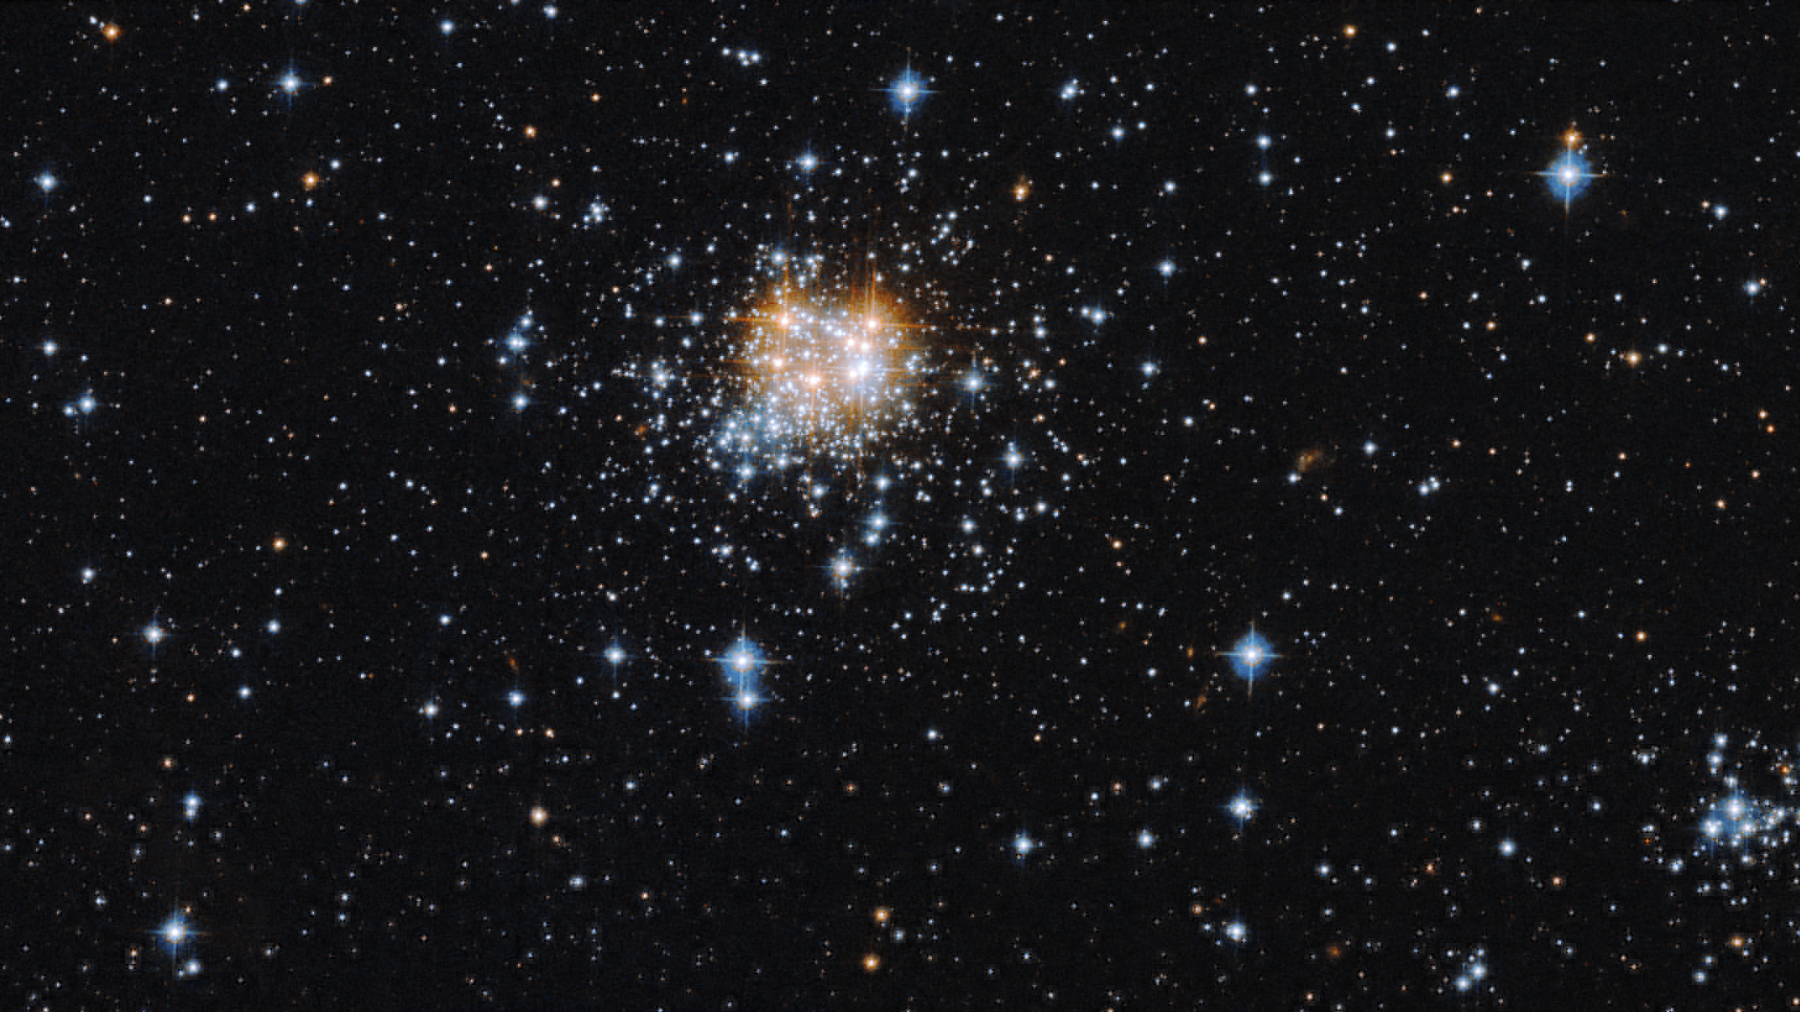 Hubble telescope spots magnificent open star cluster 160,000 light-years away